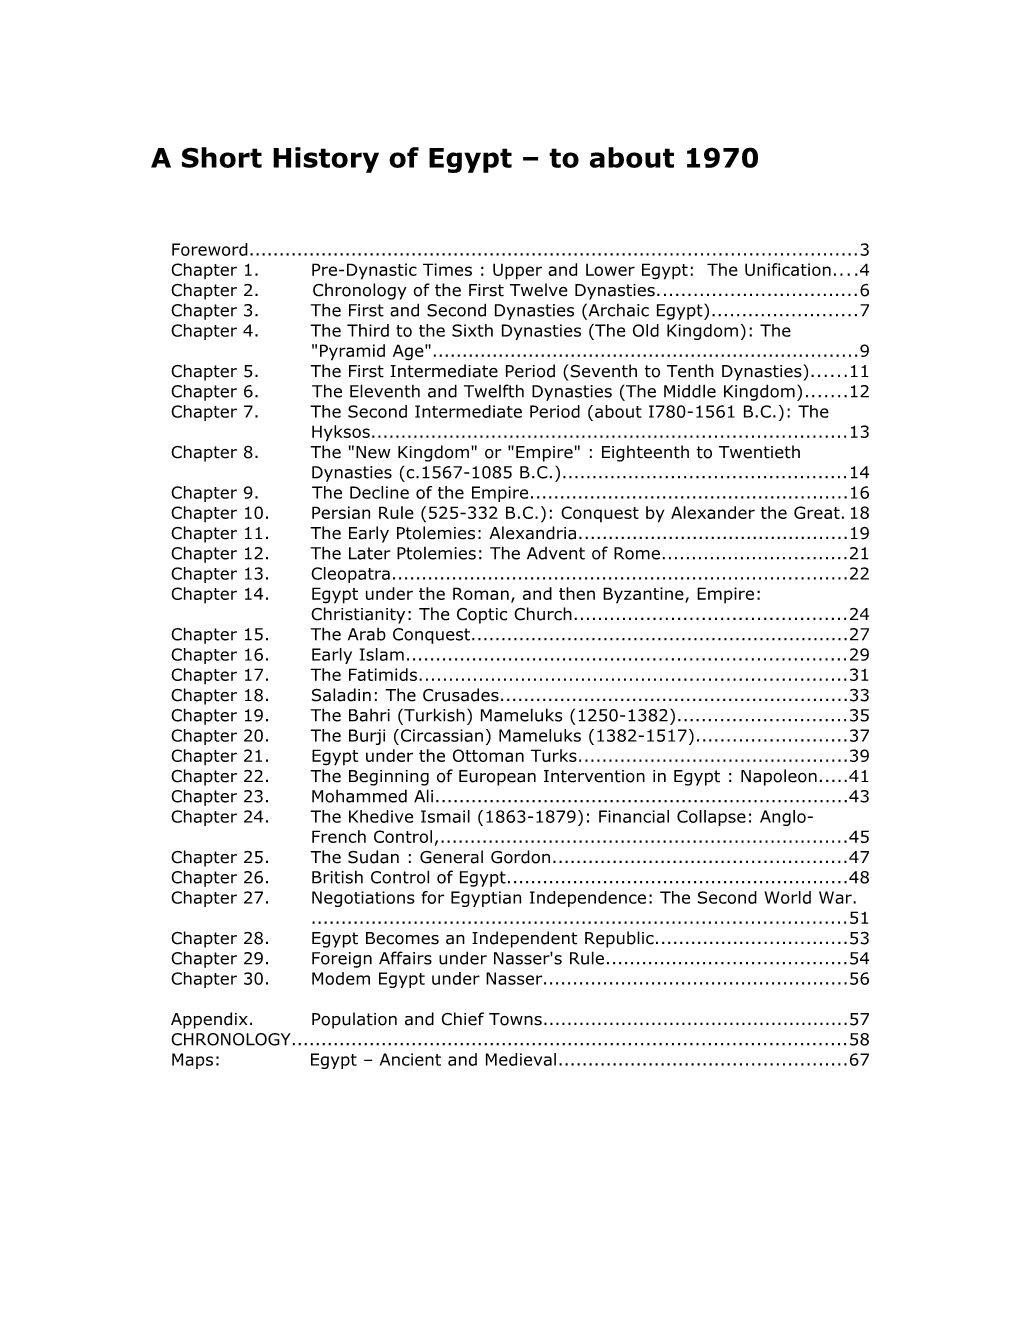 A Short History of Egypt to About 1970